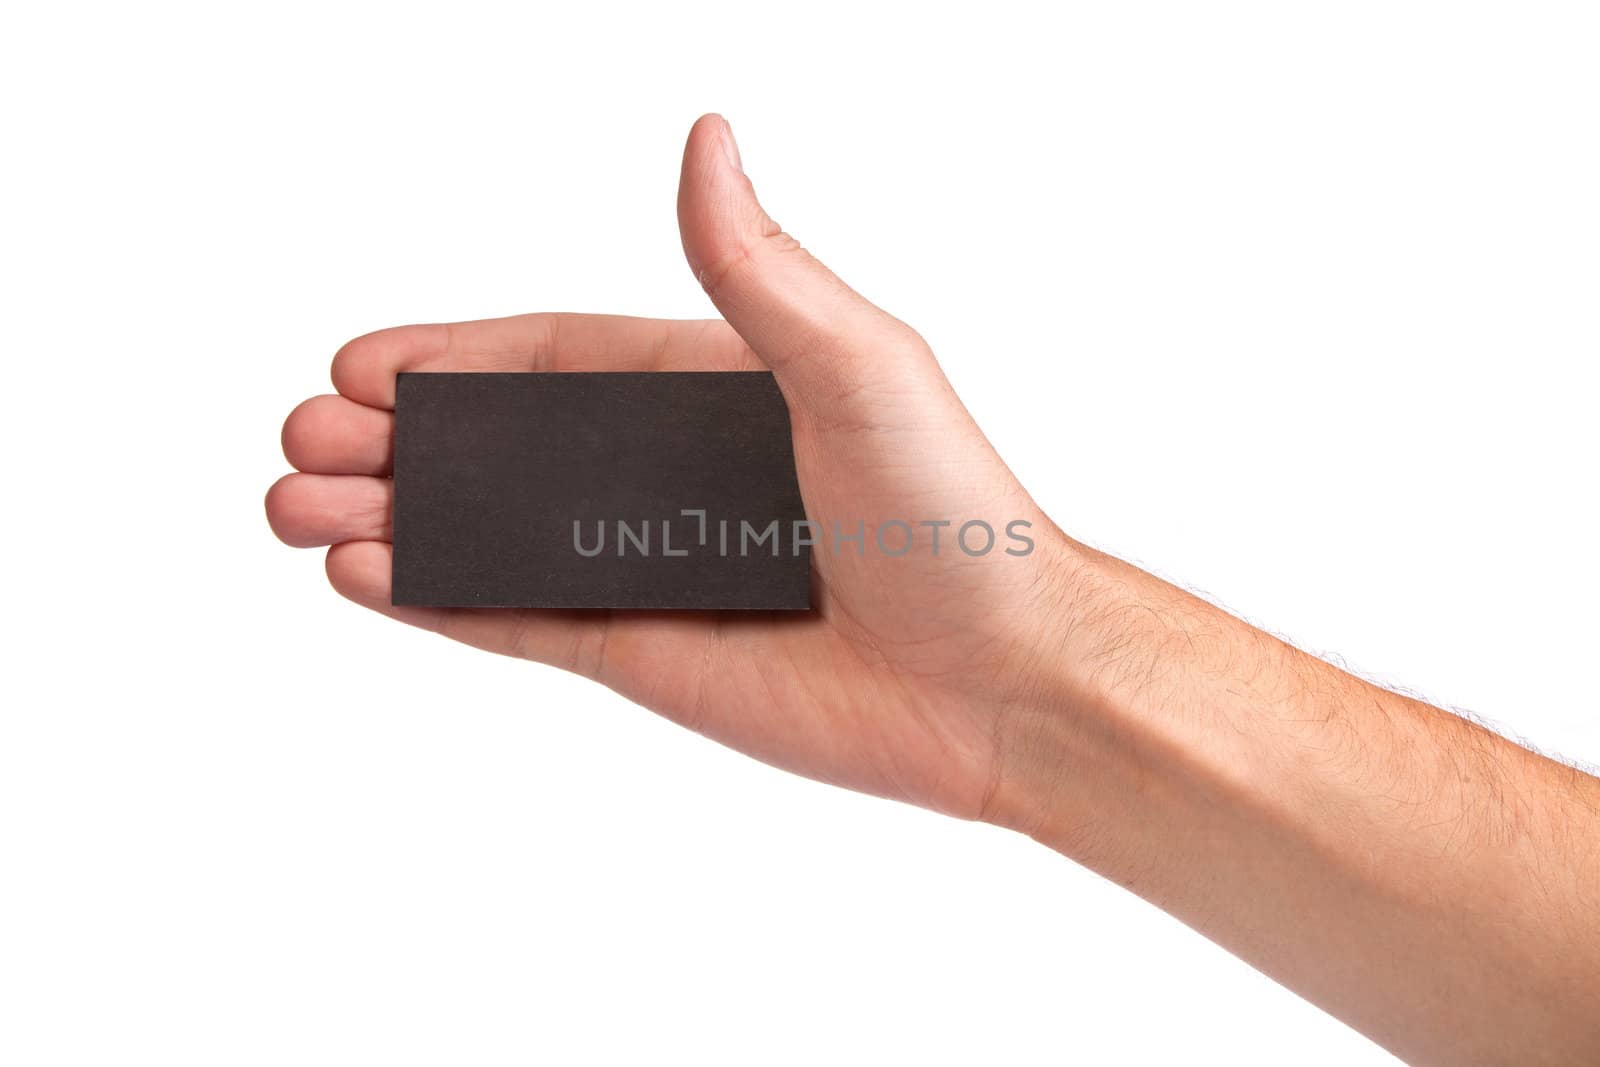 Businessman's hand holding blank paper business card, closeup isolated on white background